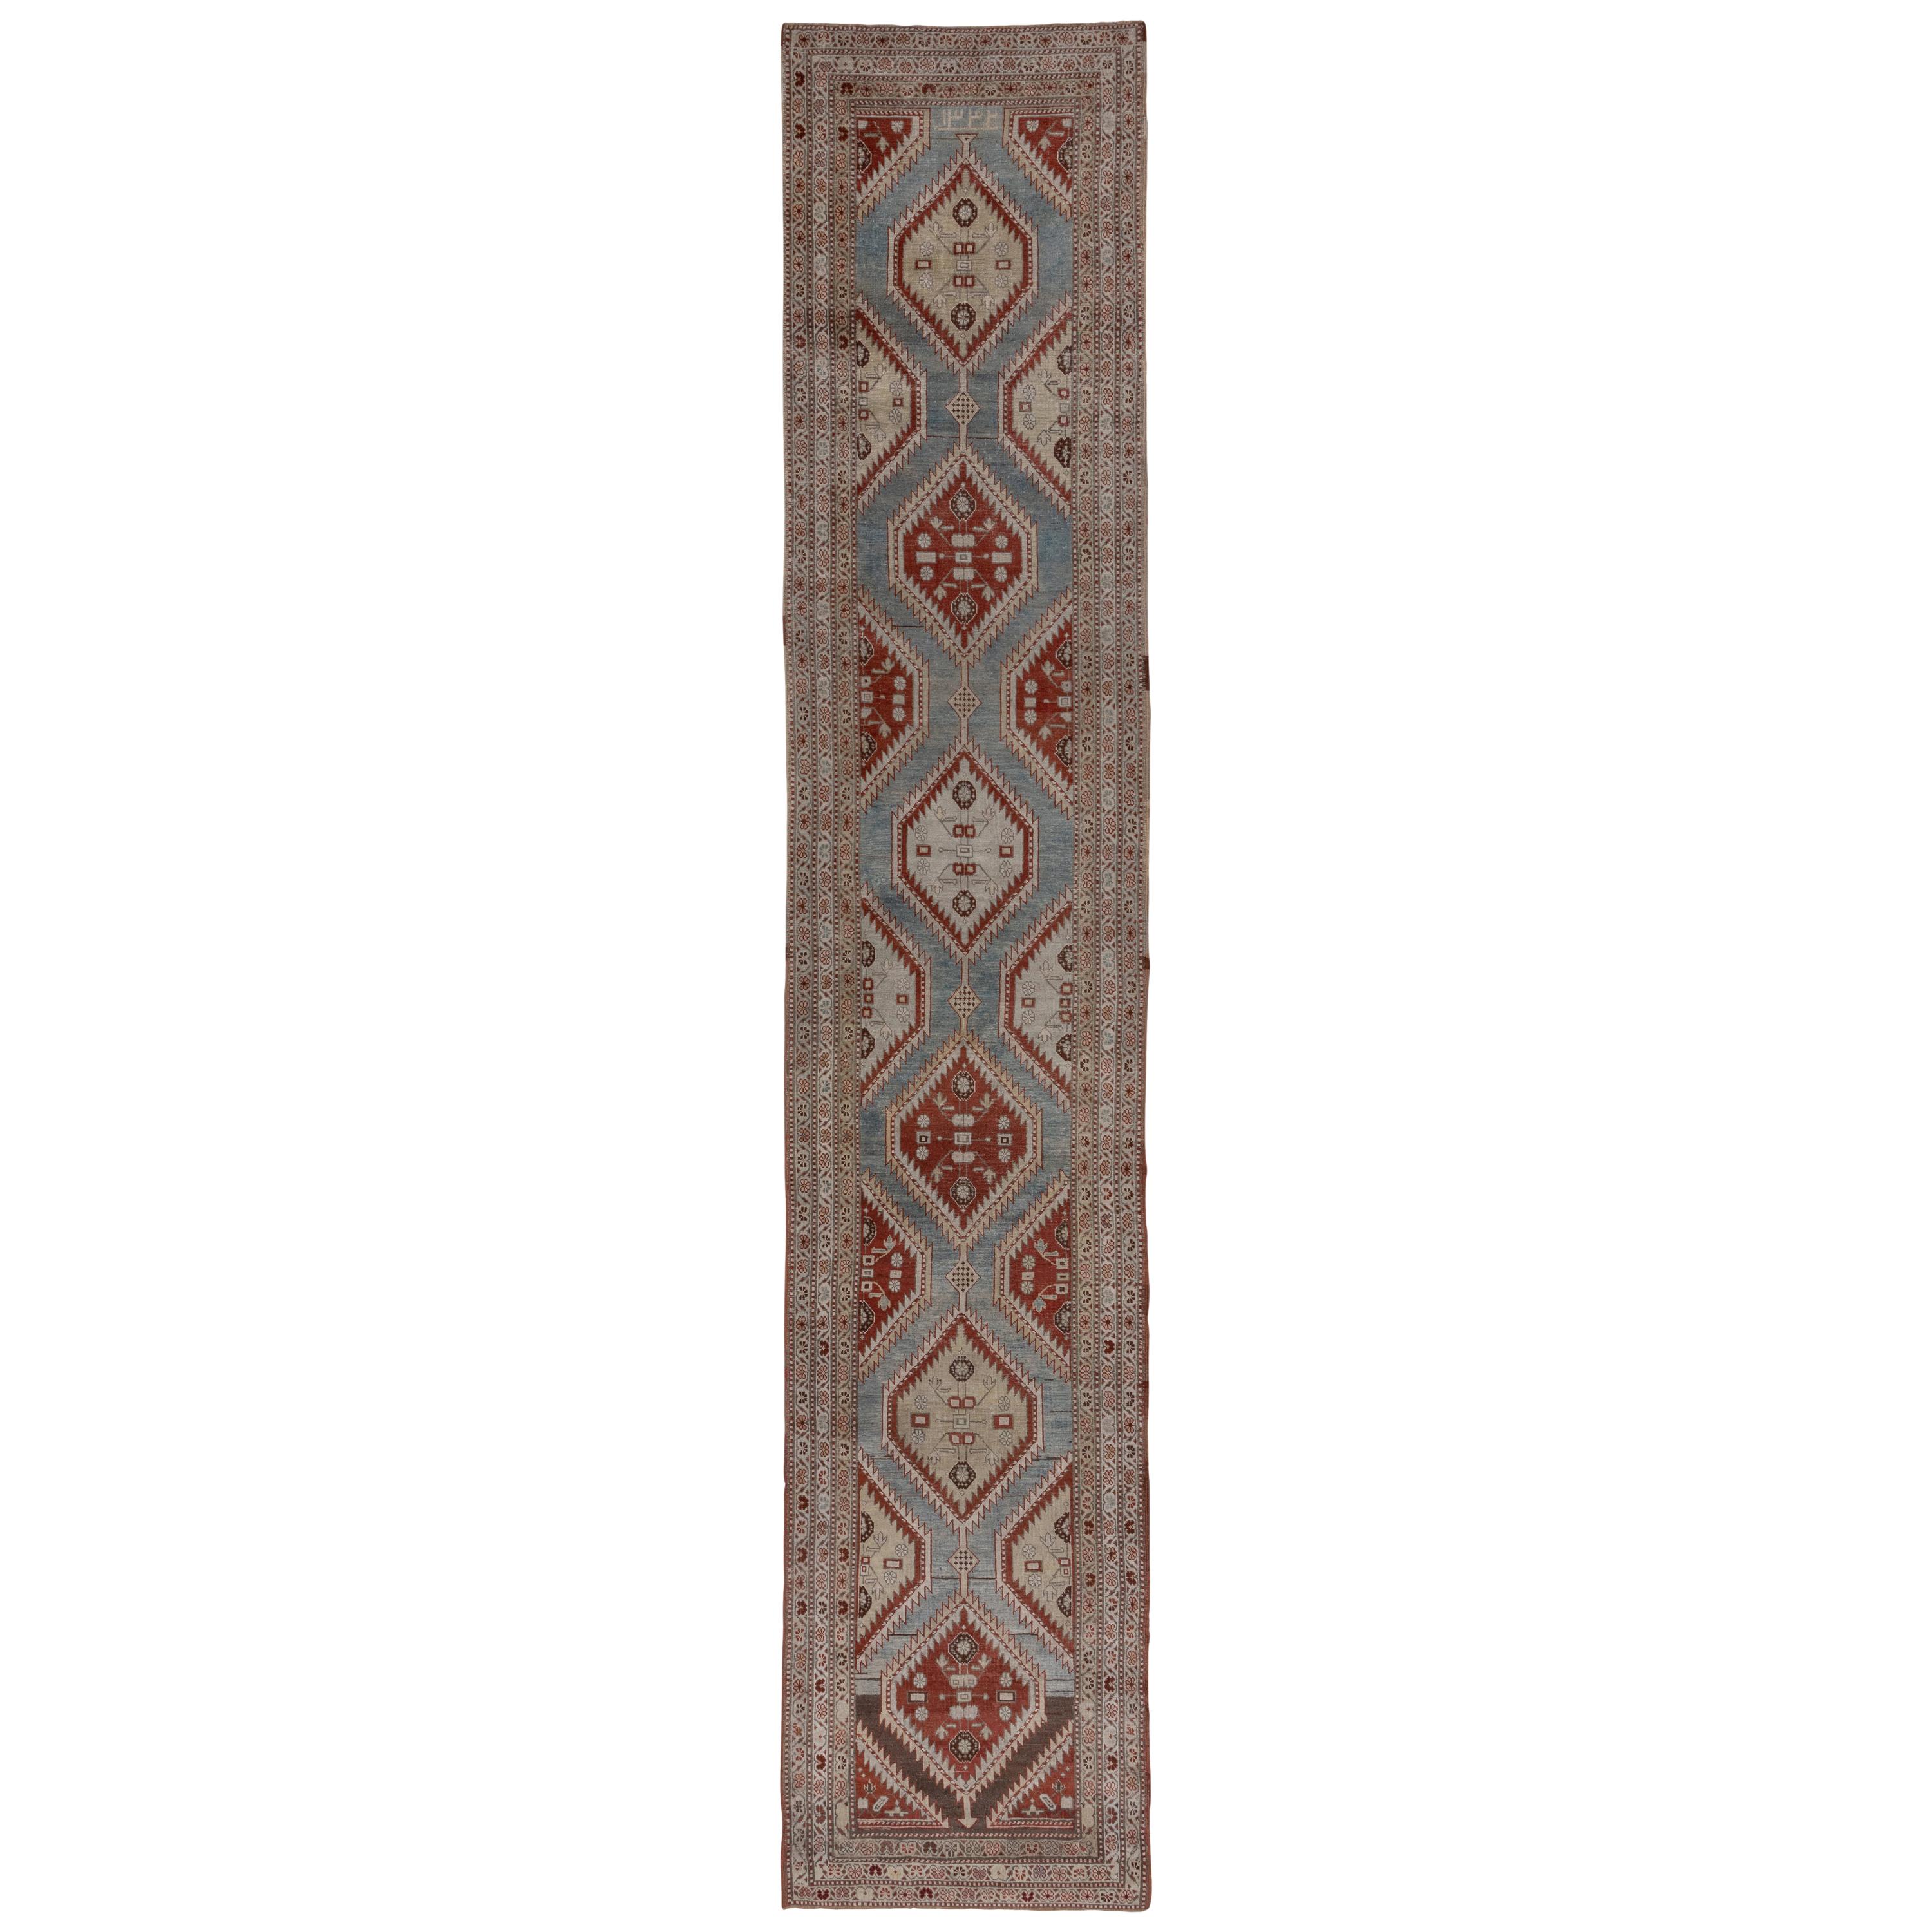 Tribal Northwest Persian Runner, Colorful, Long, circa 1910s For Sale